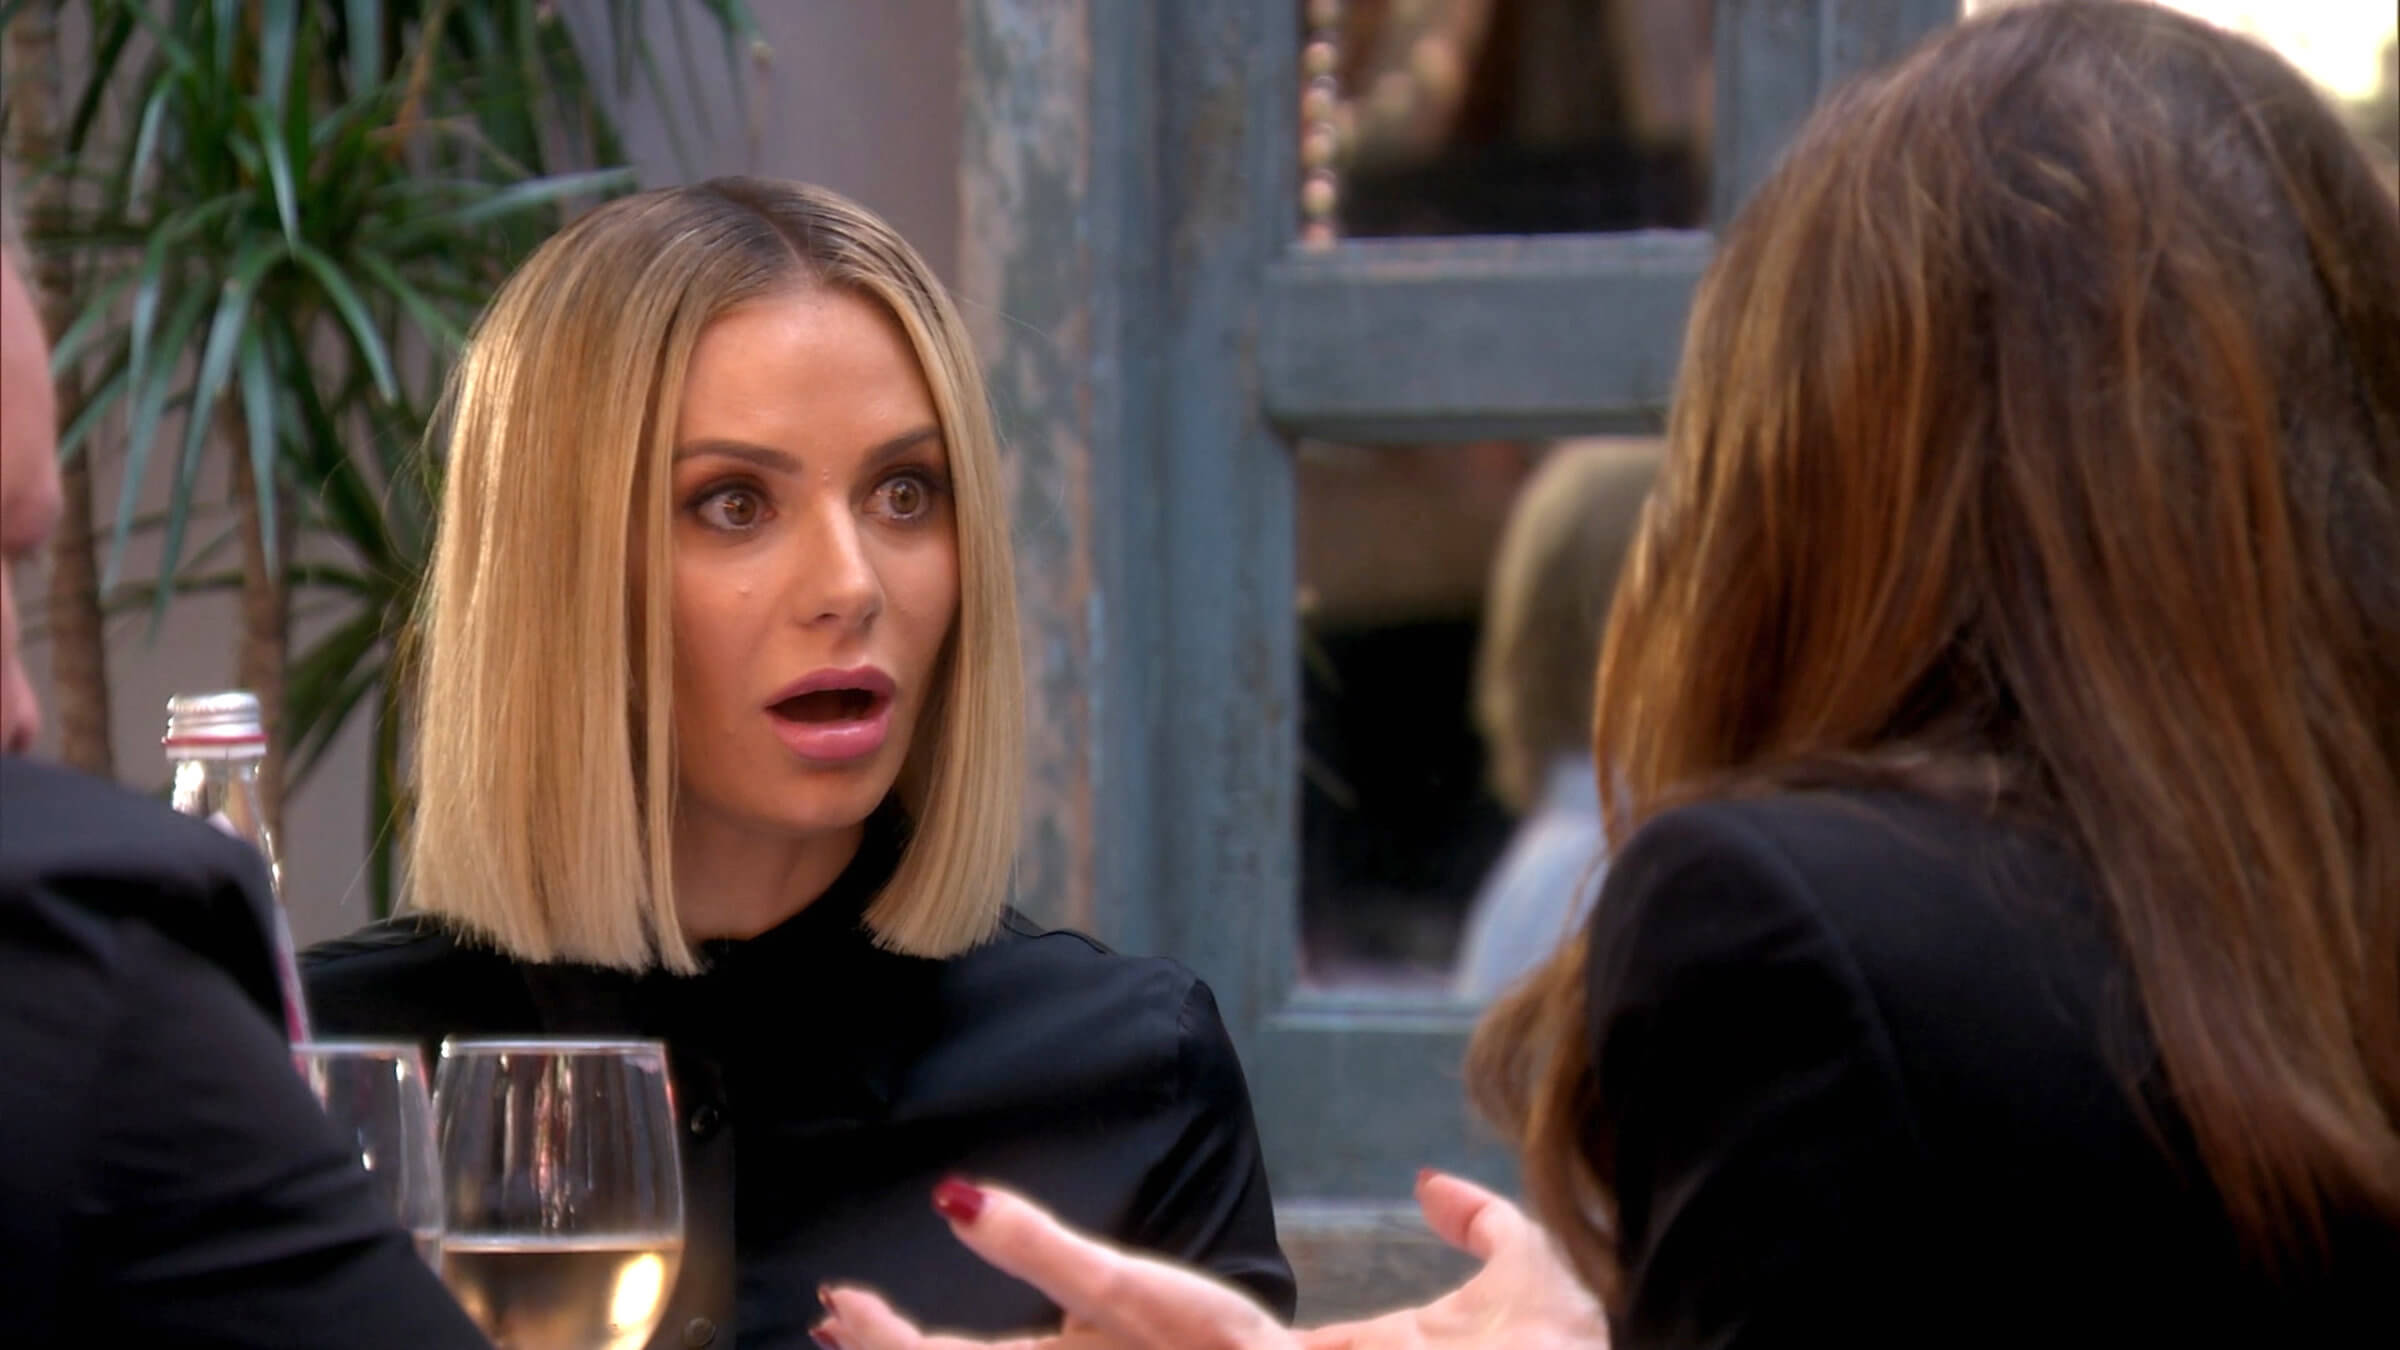 RHOBH RECAP: Lisa Vanderpump Cuts Ties with Dorit But Remains Friends With PK & Kyle Unleashes On Dorit Because of It!